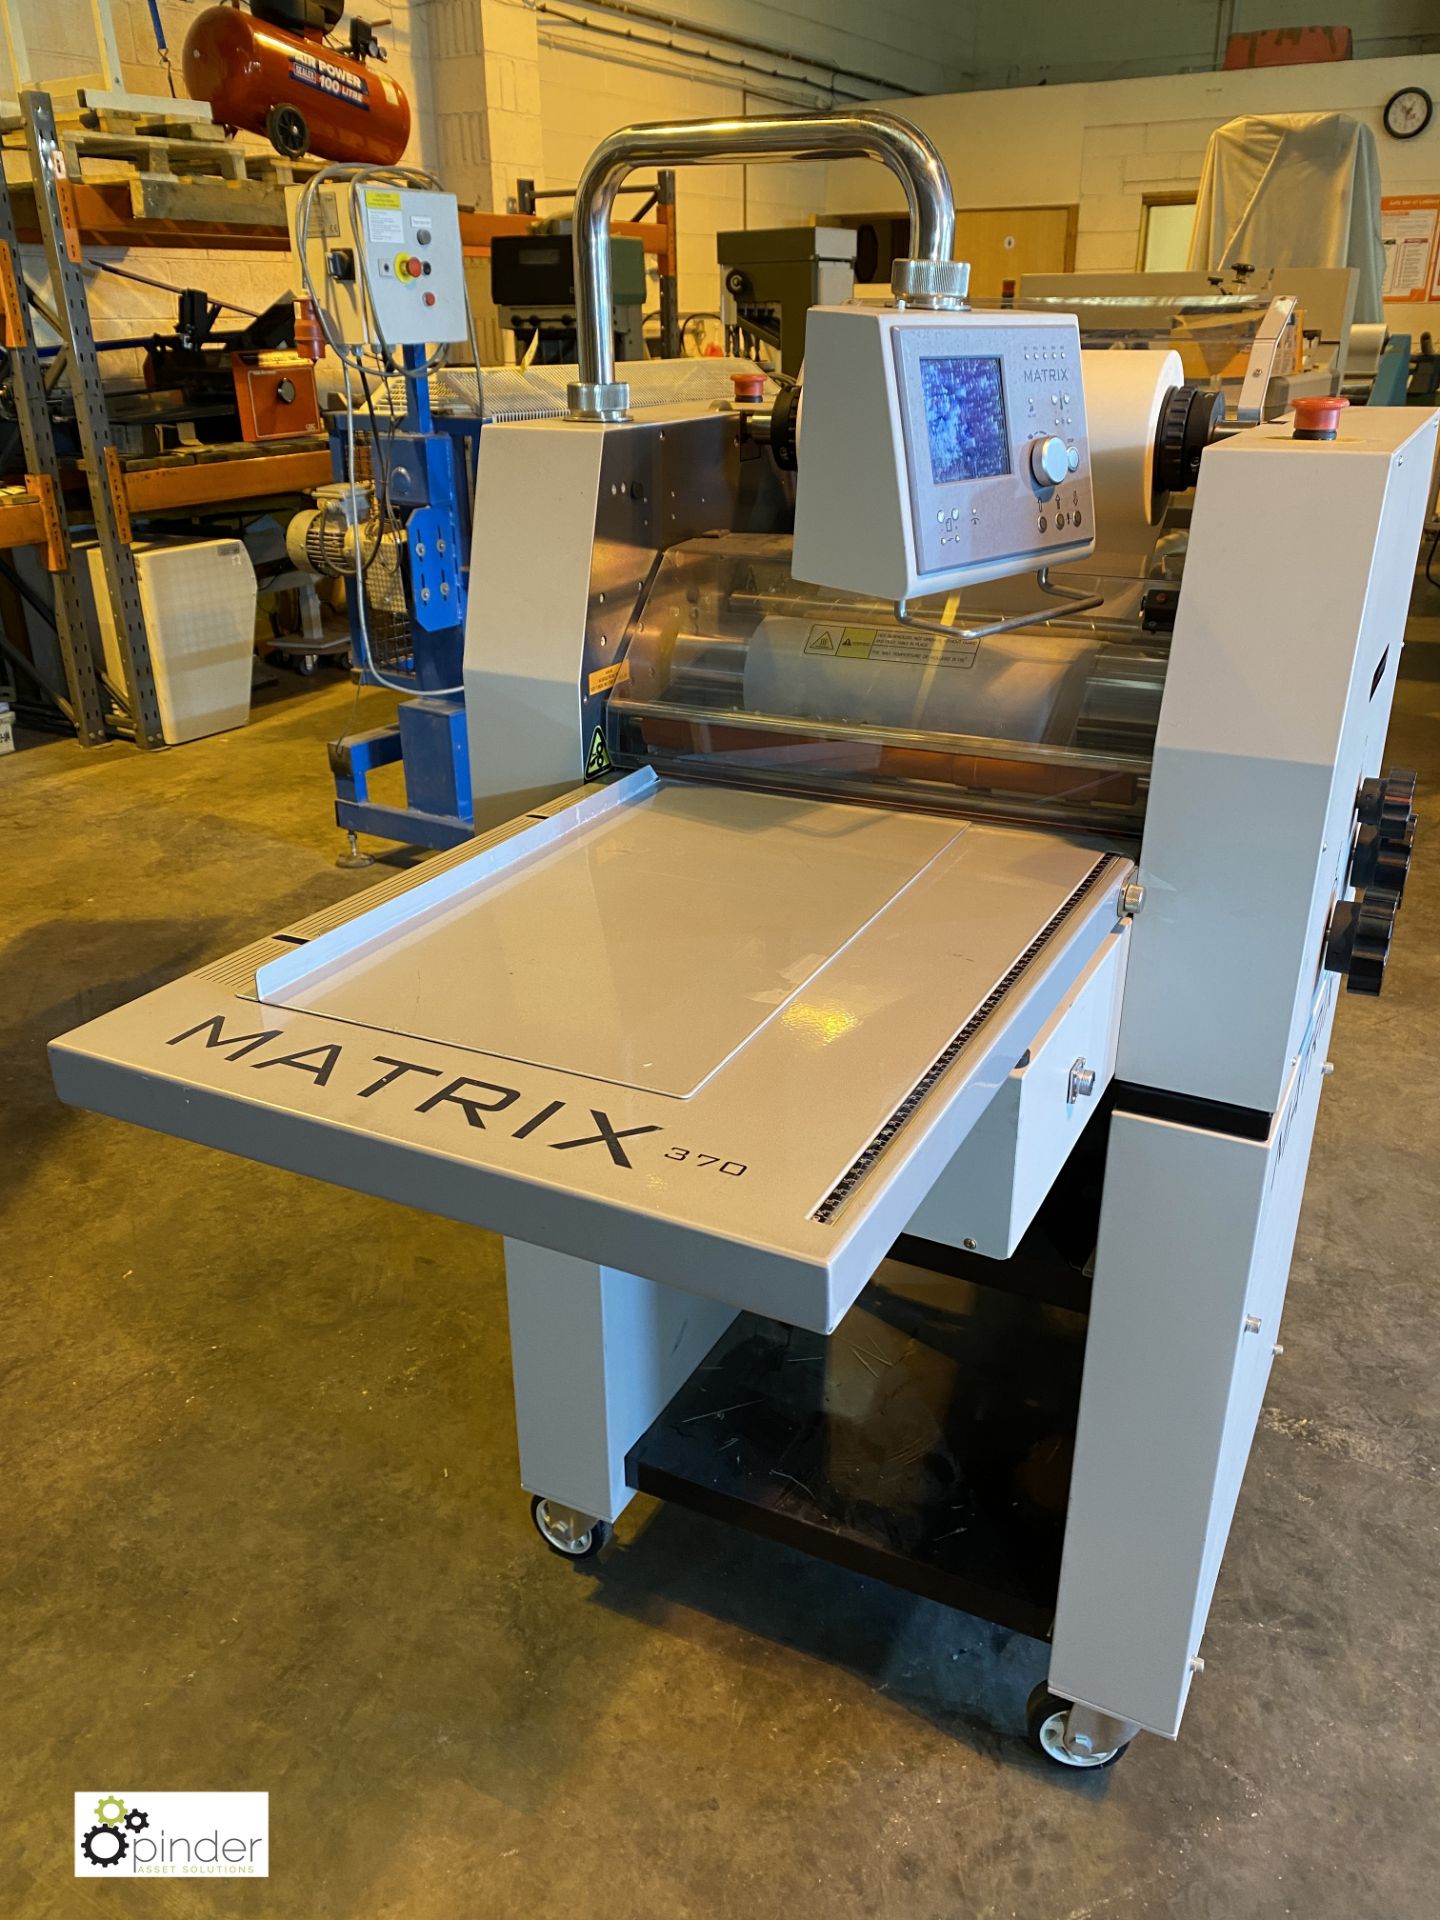 Matrix 370 Roll Laminator, 315mm width, 240volts, serial number 1112MX-370074, with 5 part rolls - Image 9 of 12